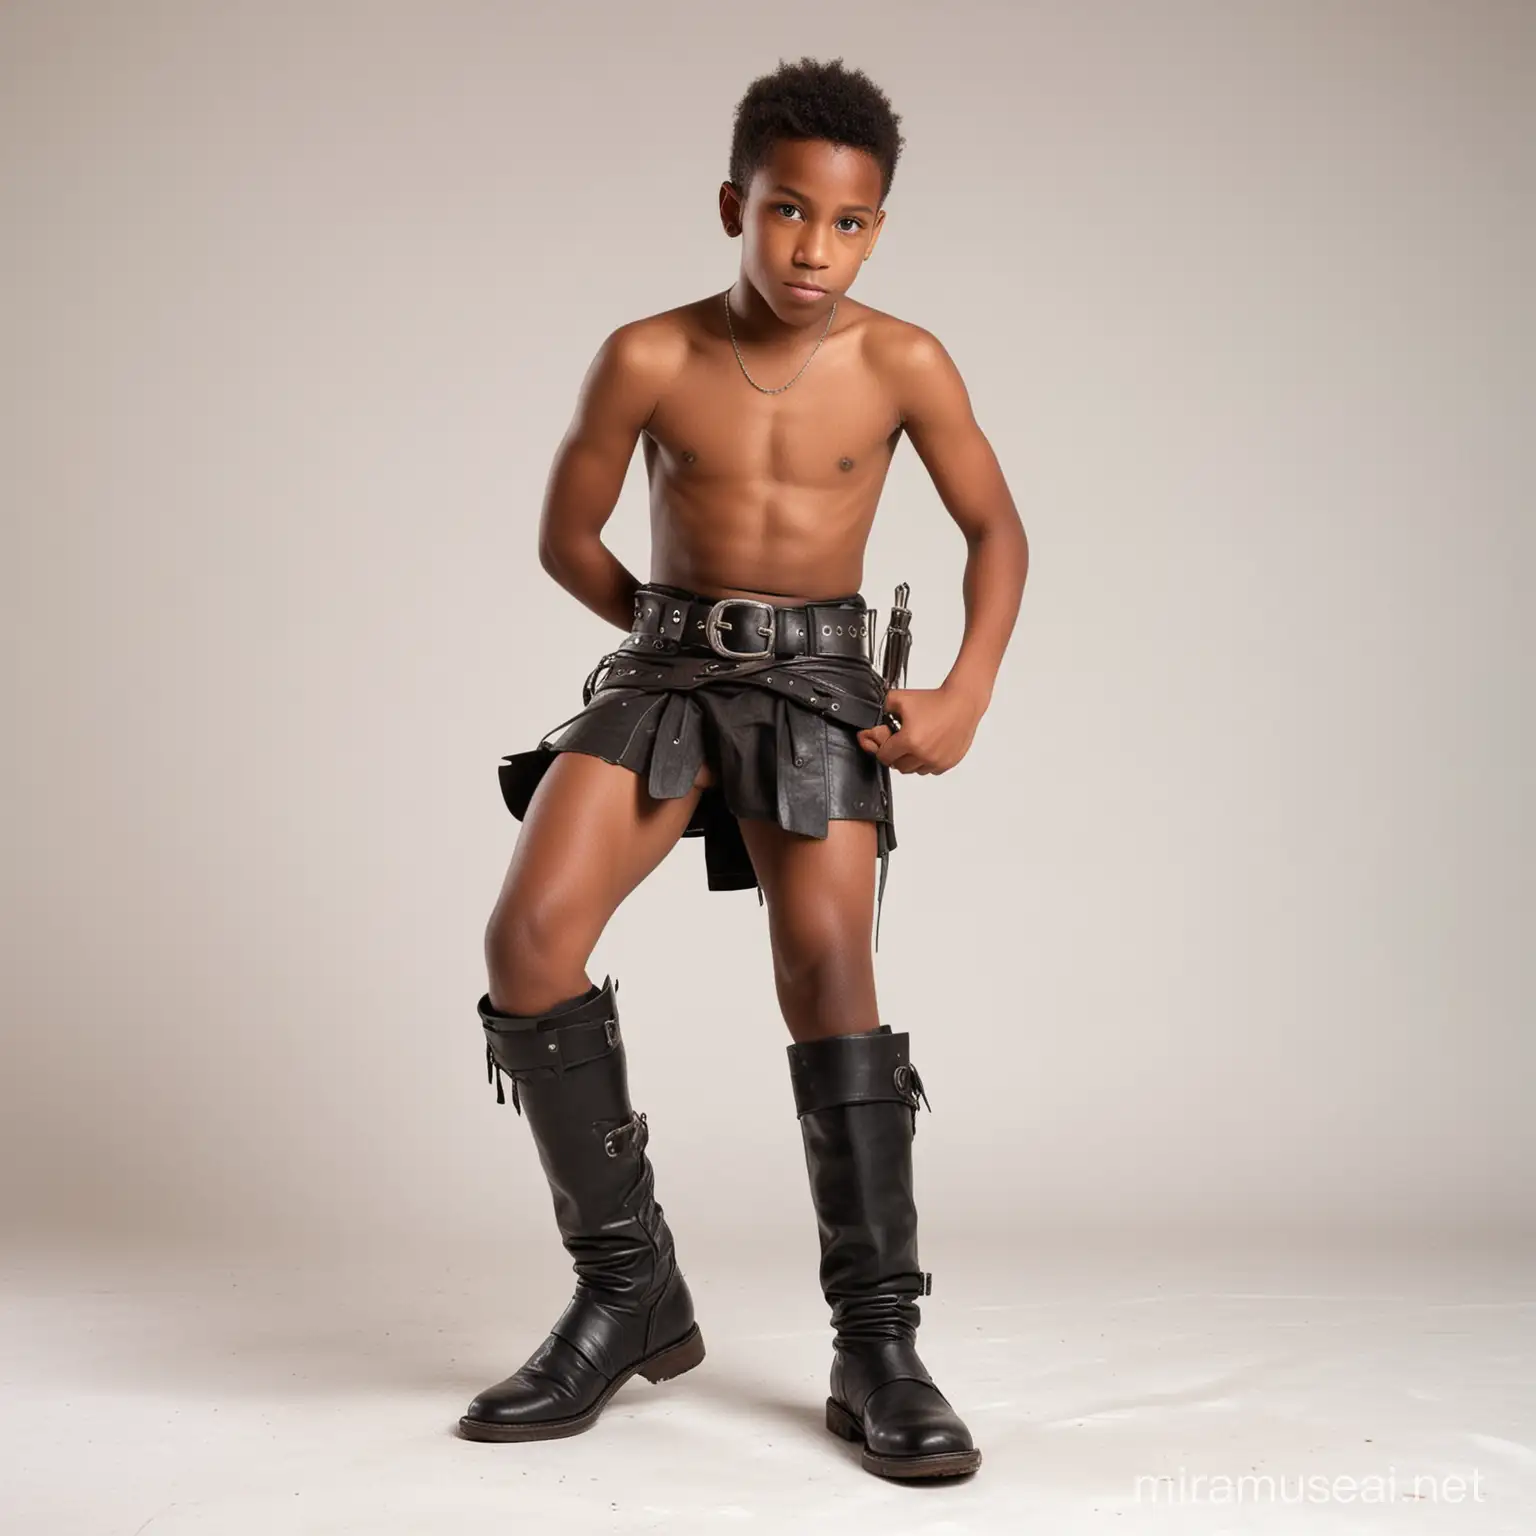 A very young black shirtless teenage boy warrior, wearing a very short loincloth with a big leather belt and boots, seen from behind crouching, white background.